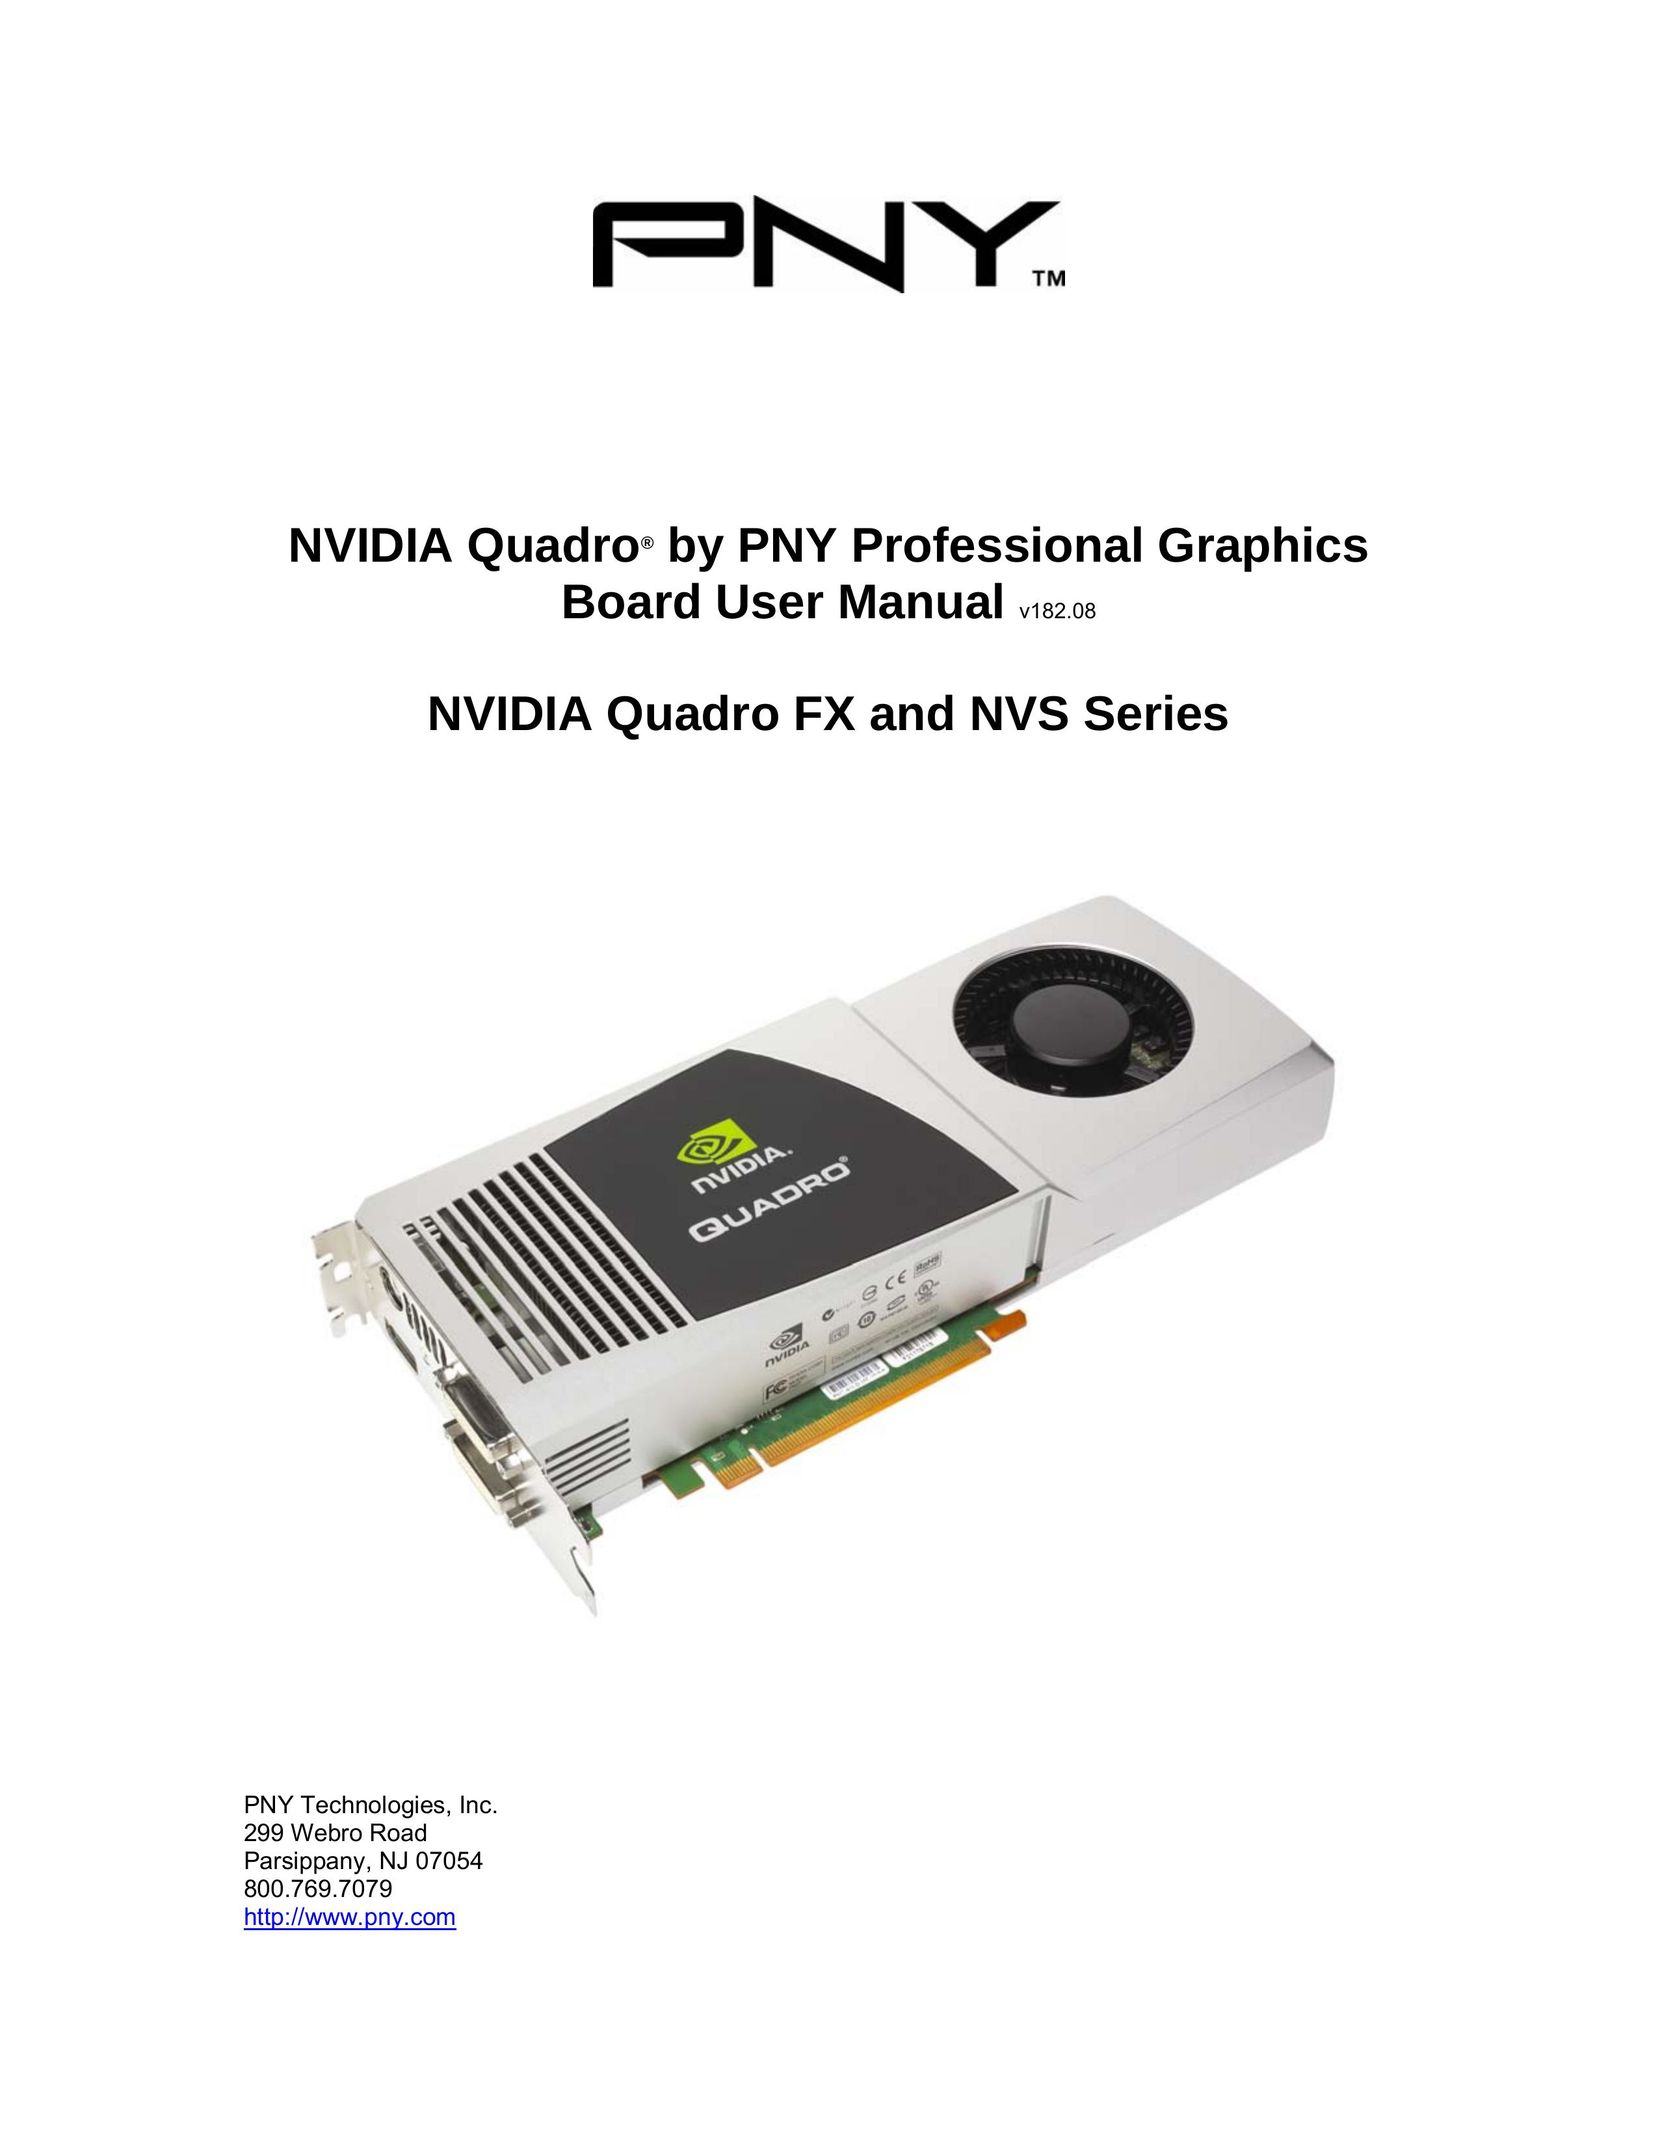 PNY FX 580 Computer Hardware User Manual